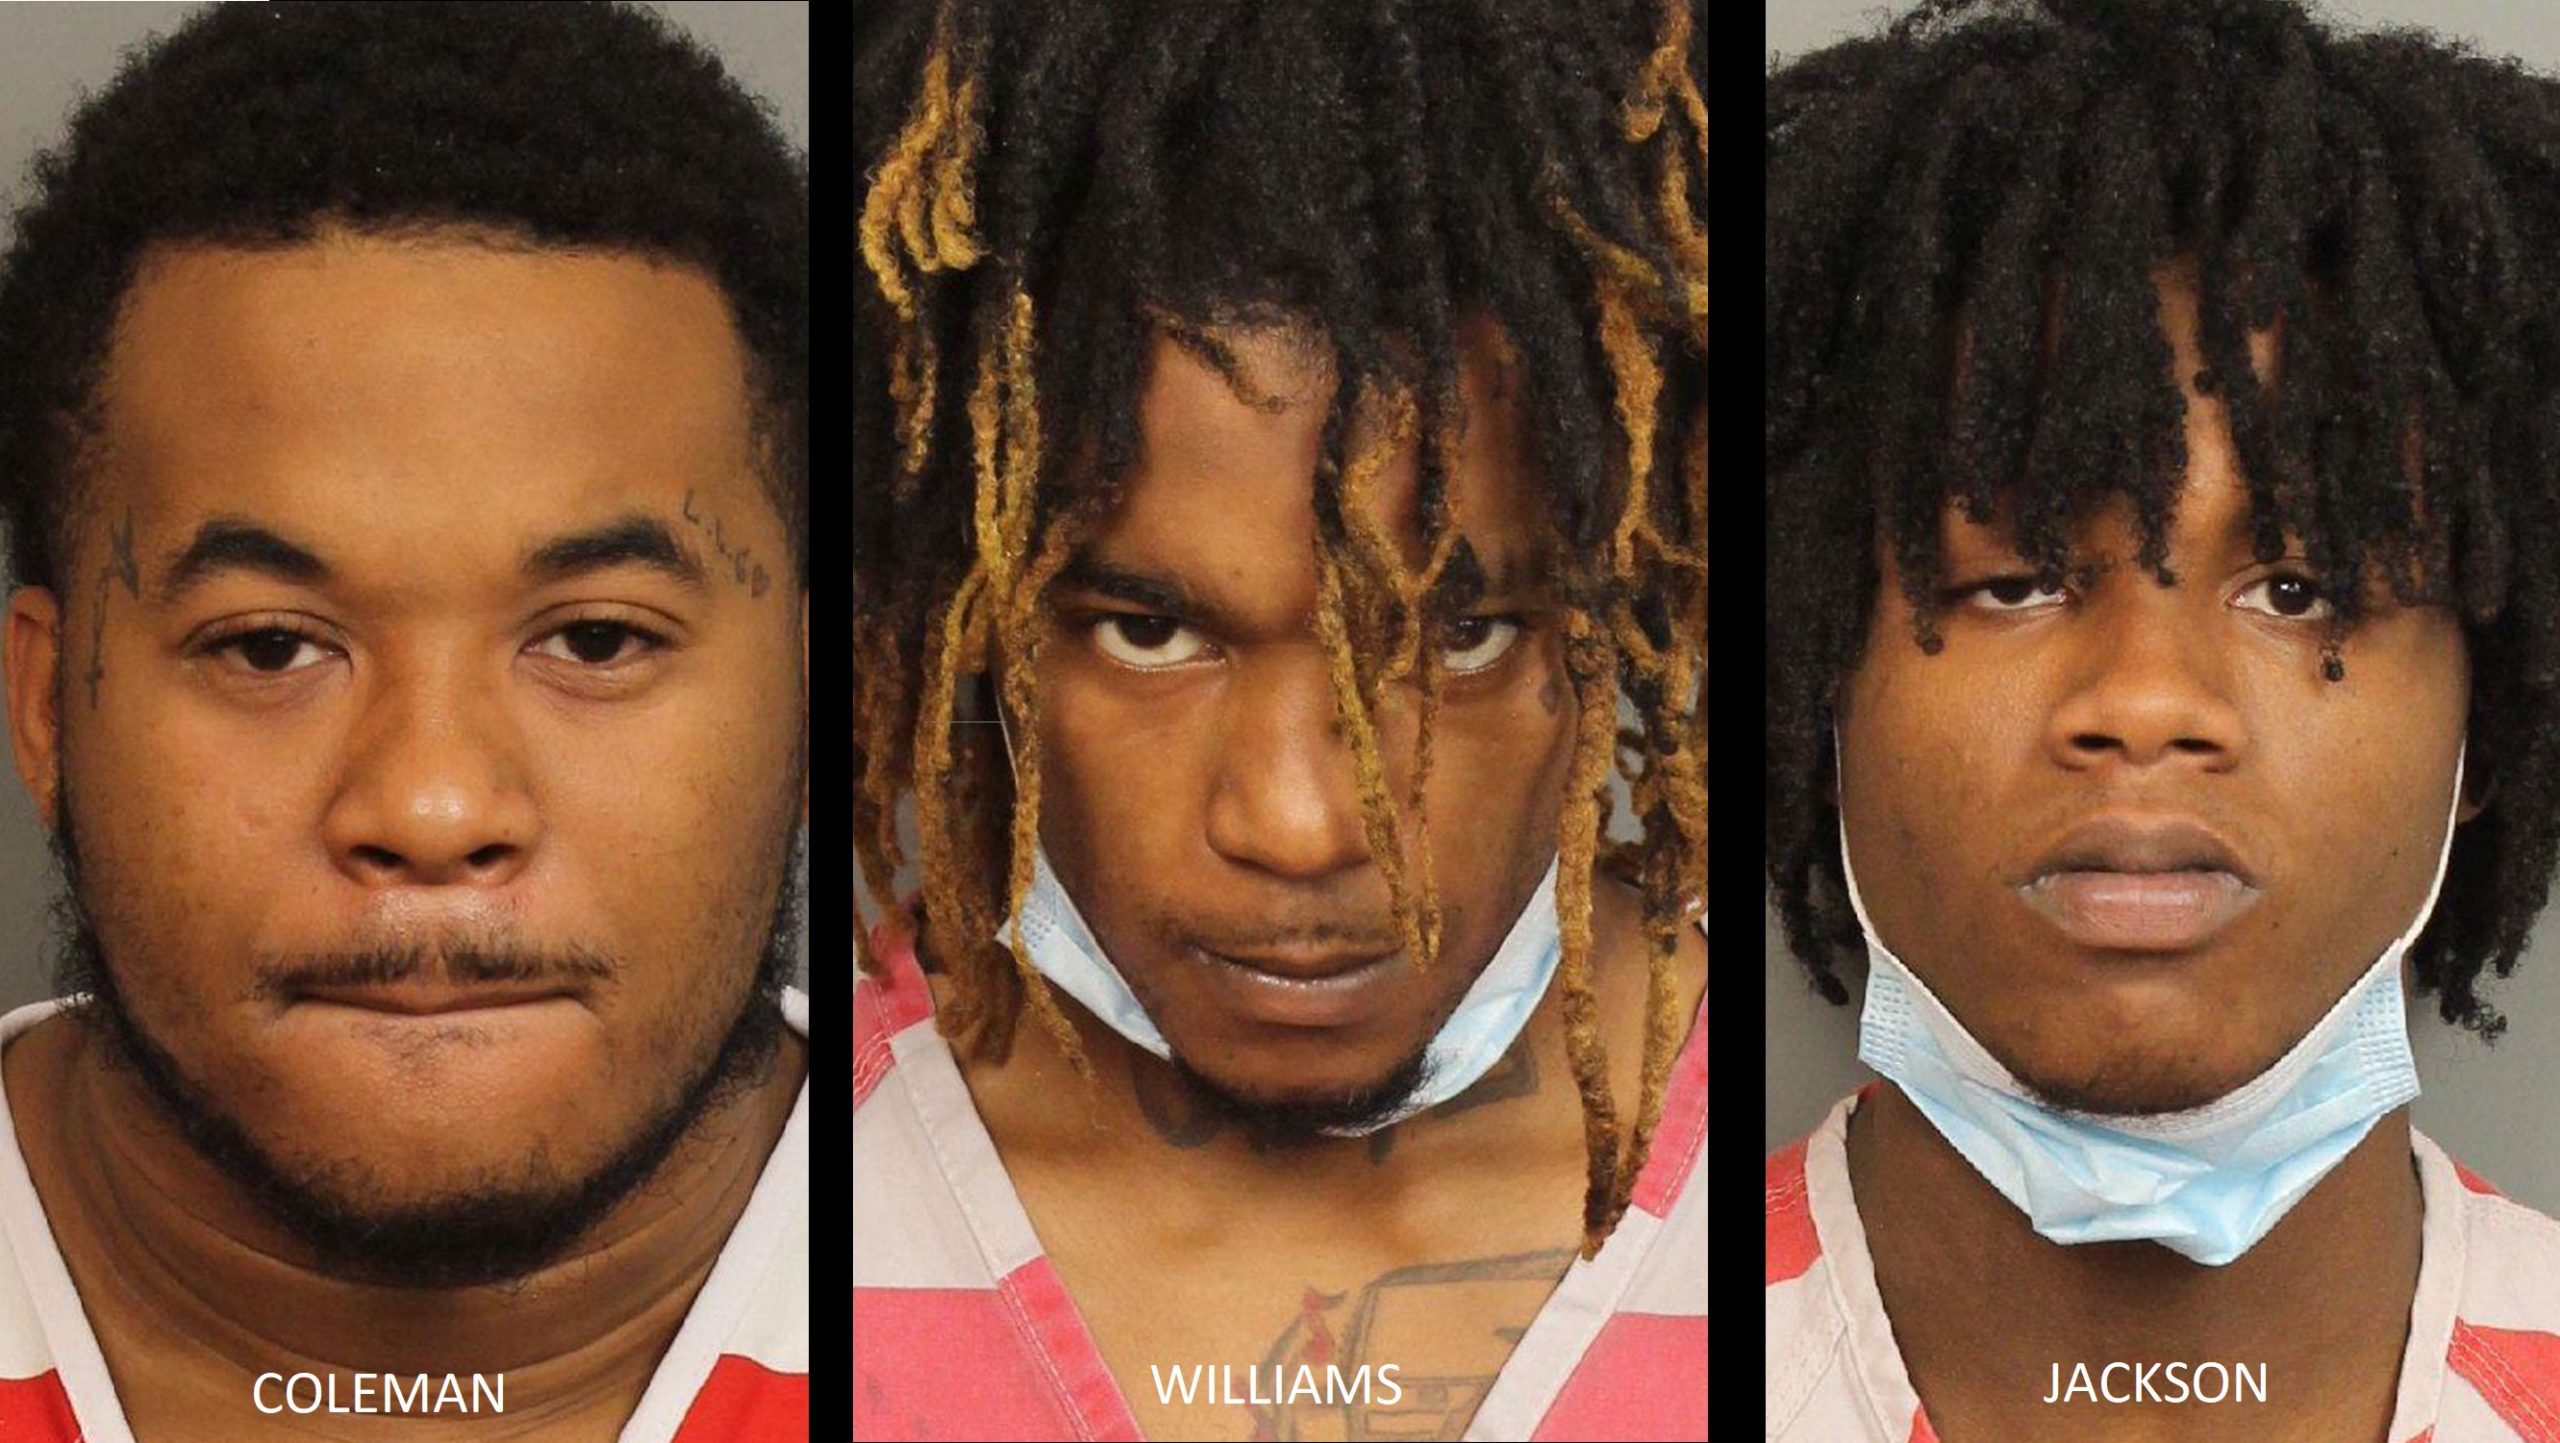 2 more suspects arrested in connection to deadly shooting at Riverchase Galleria